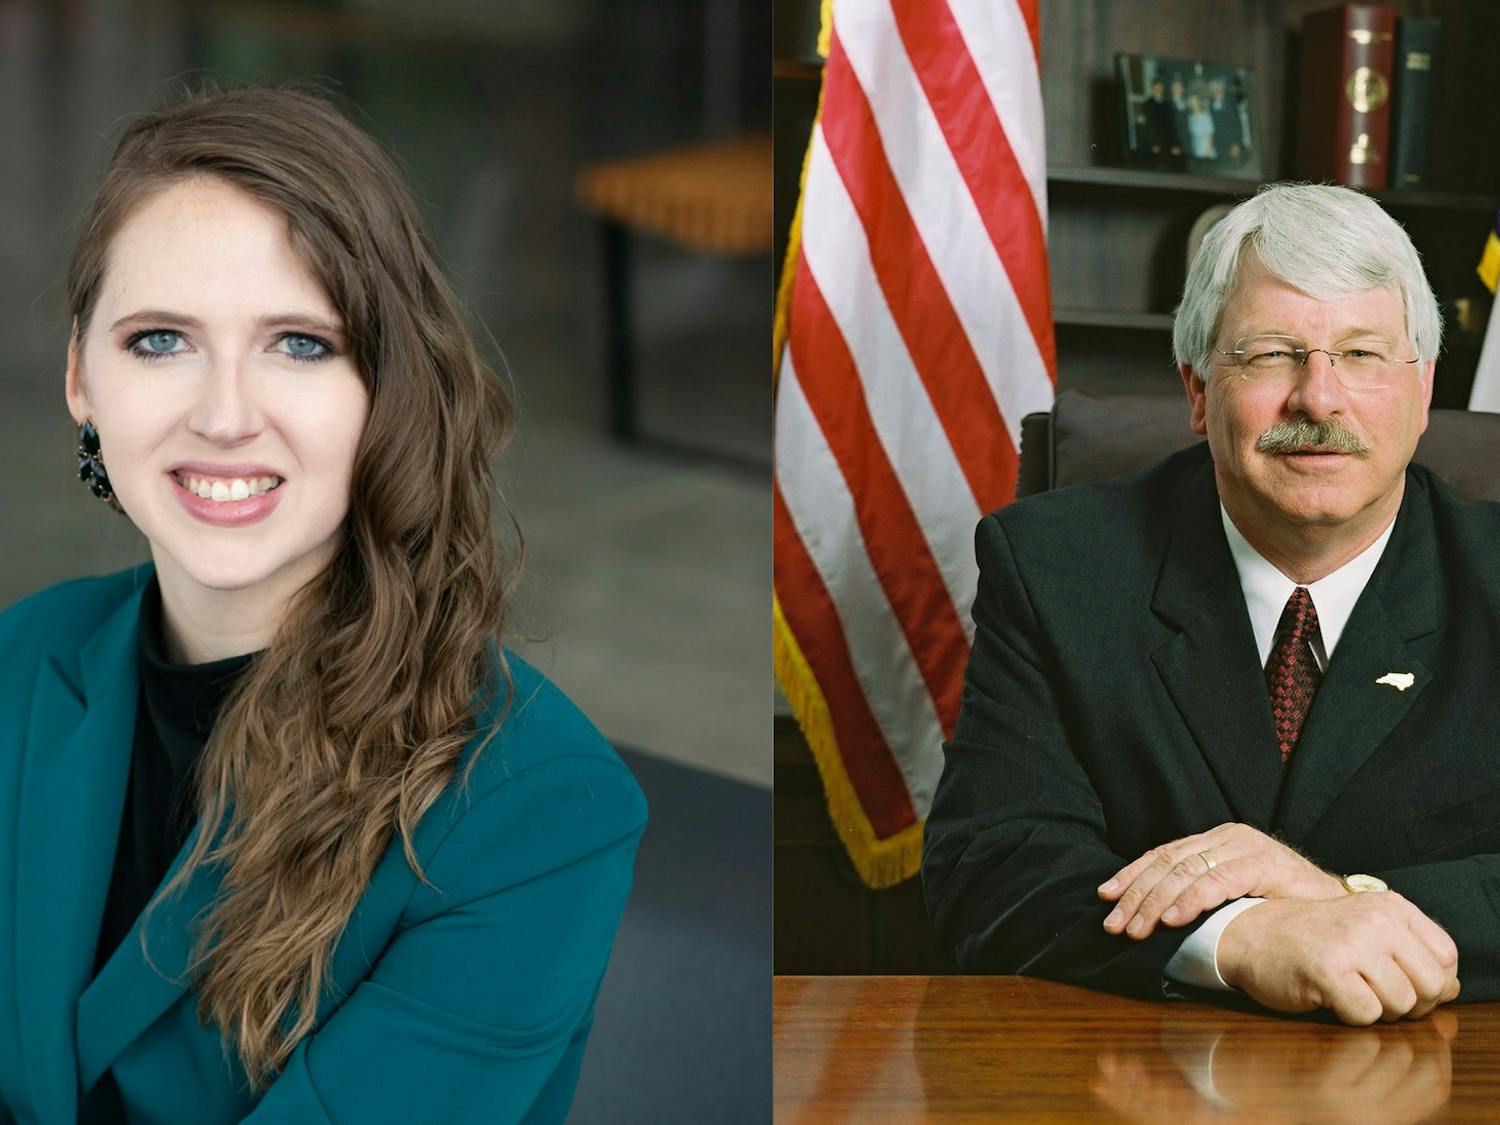 Democrat Jenna Wadsworth (left) and incumbent Republican Steve Troxler (right) are the candidates for N.C. Commissioner of Agriculture. Photos courtesy of Wadsworth and Troxler.